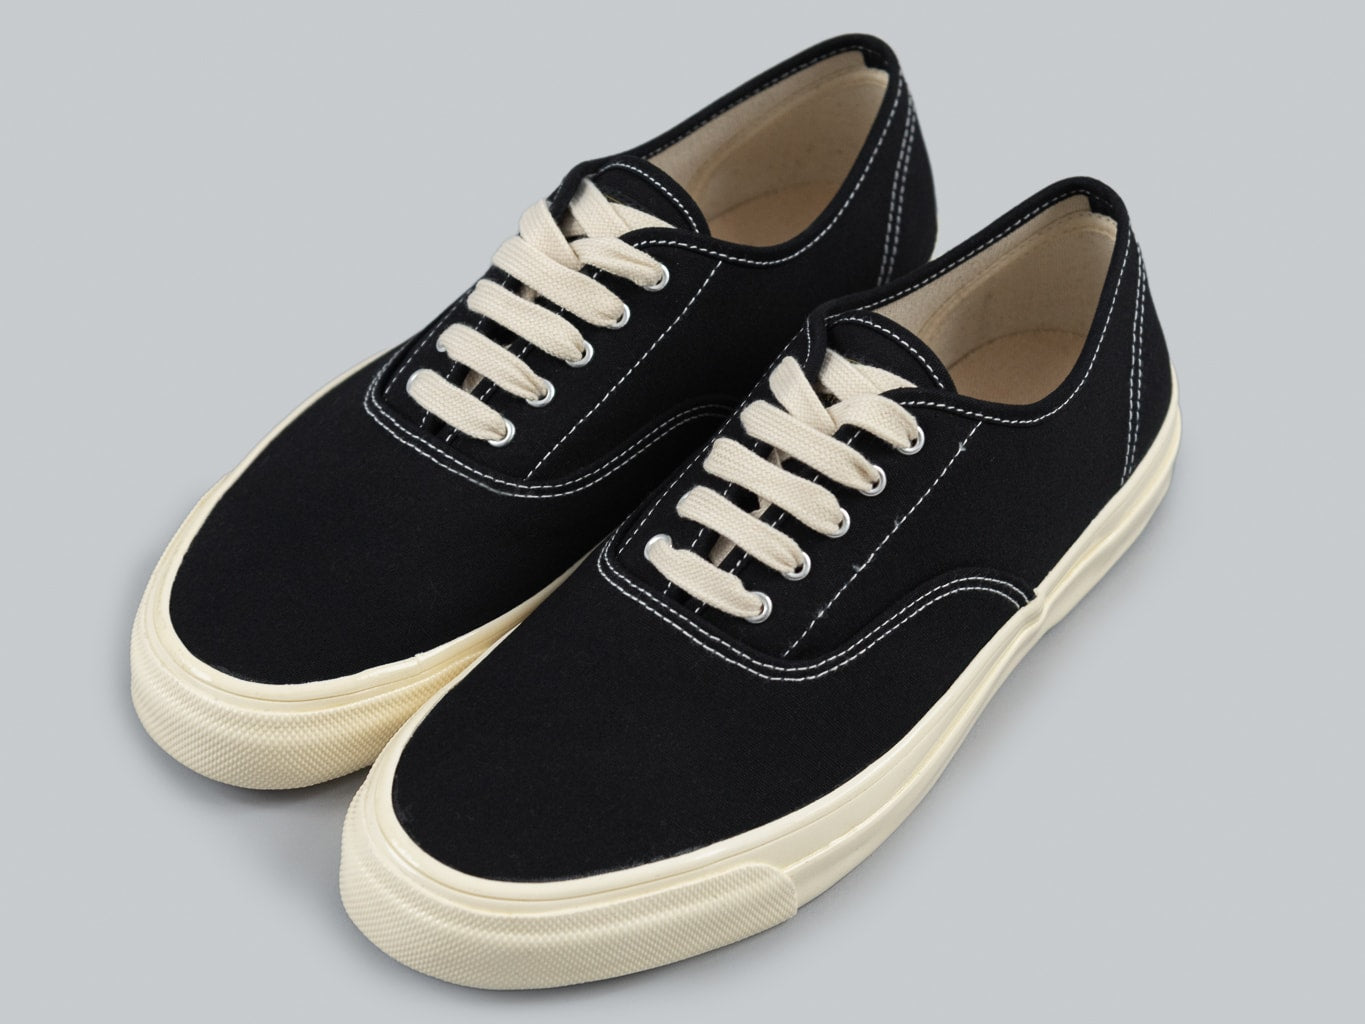 Trophy Clothing Mill Boat Shoes Black x Cream